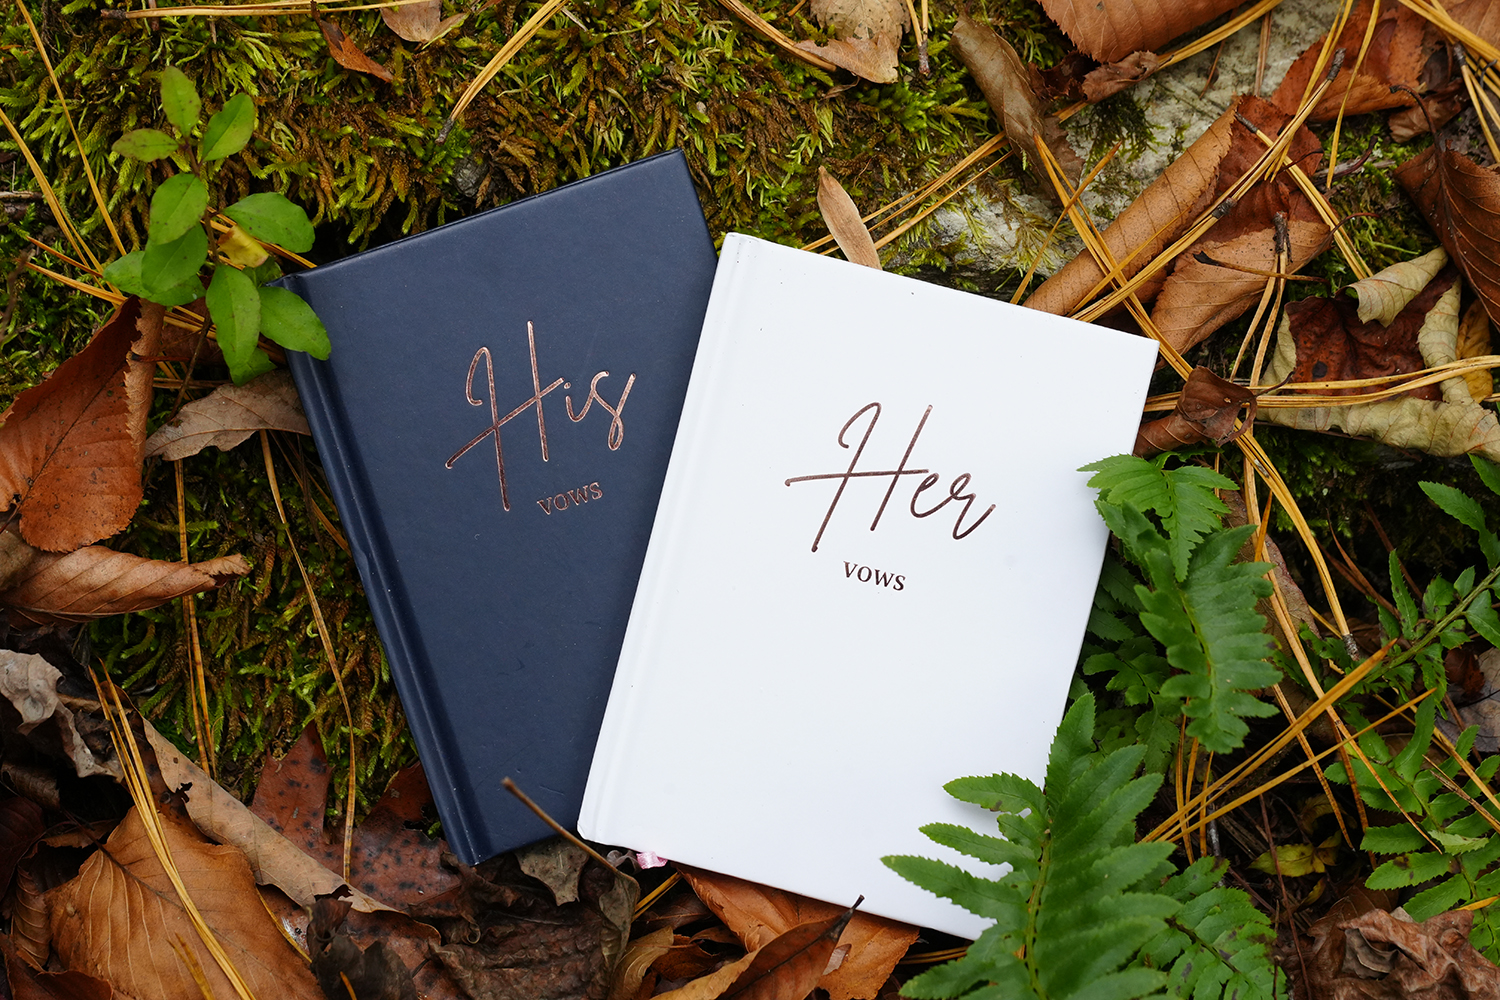 His and Her vow books laying on a forest floor with ferns